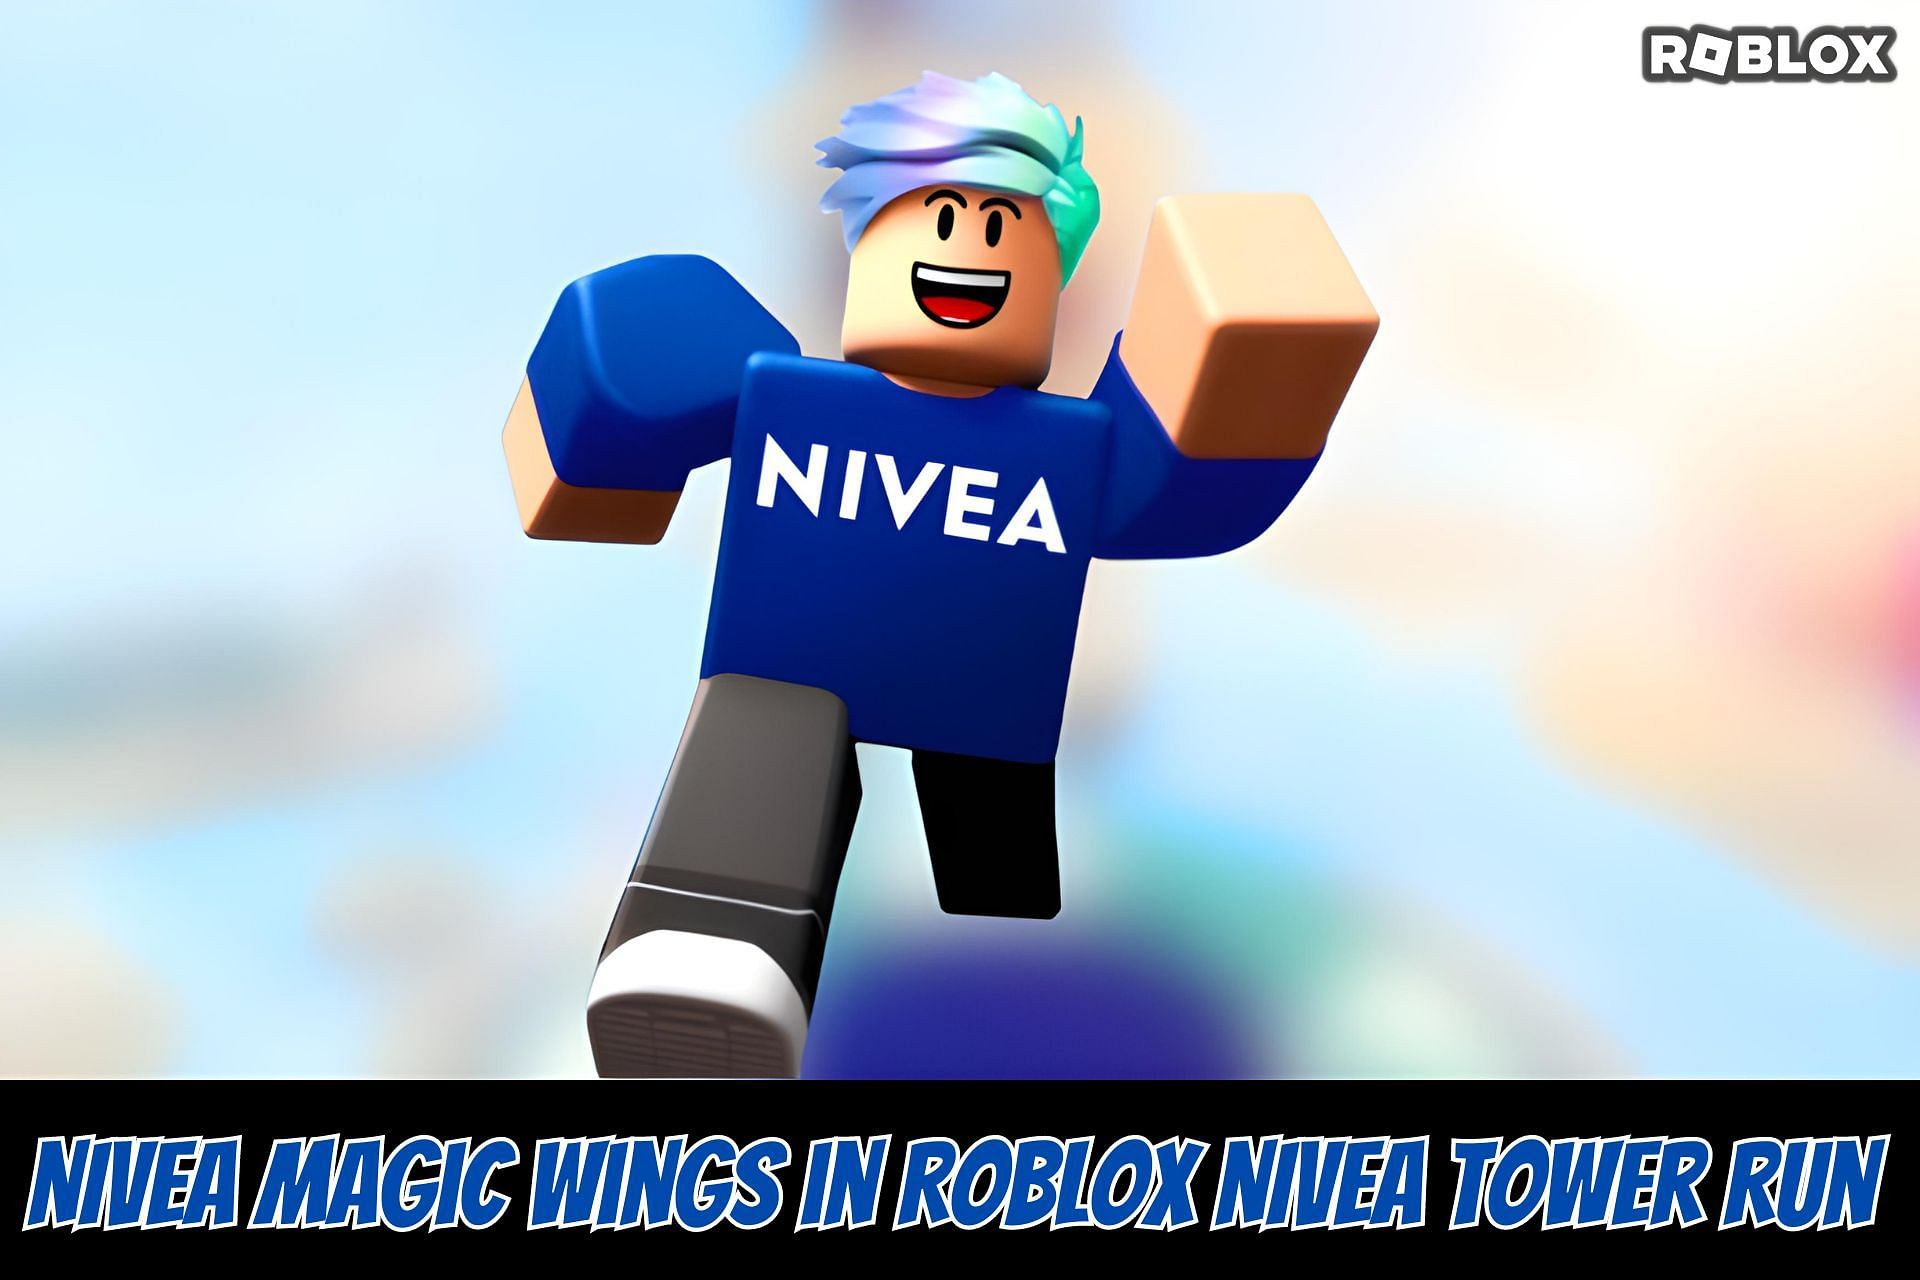 Free wing are out now! (Image via Roblox)